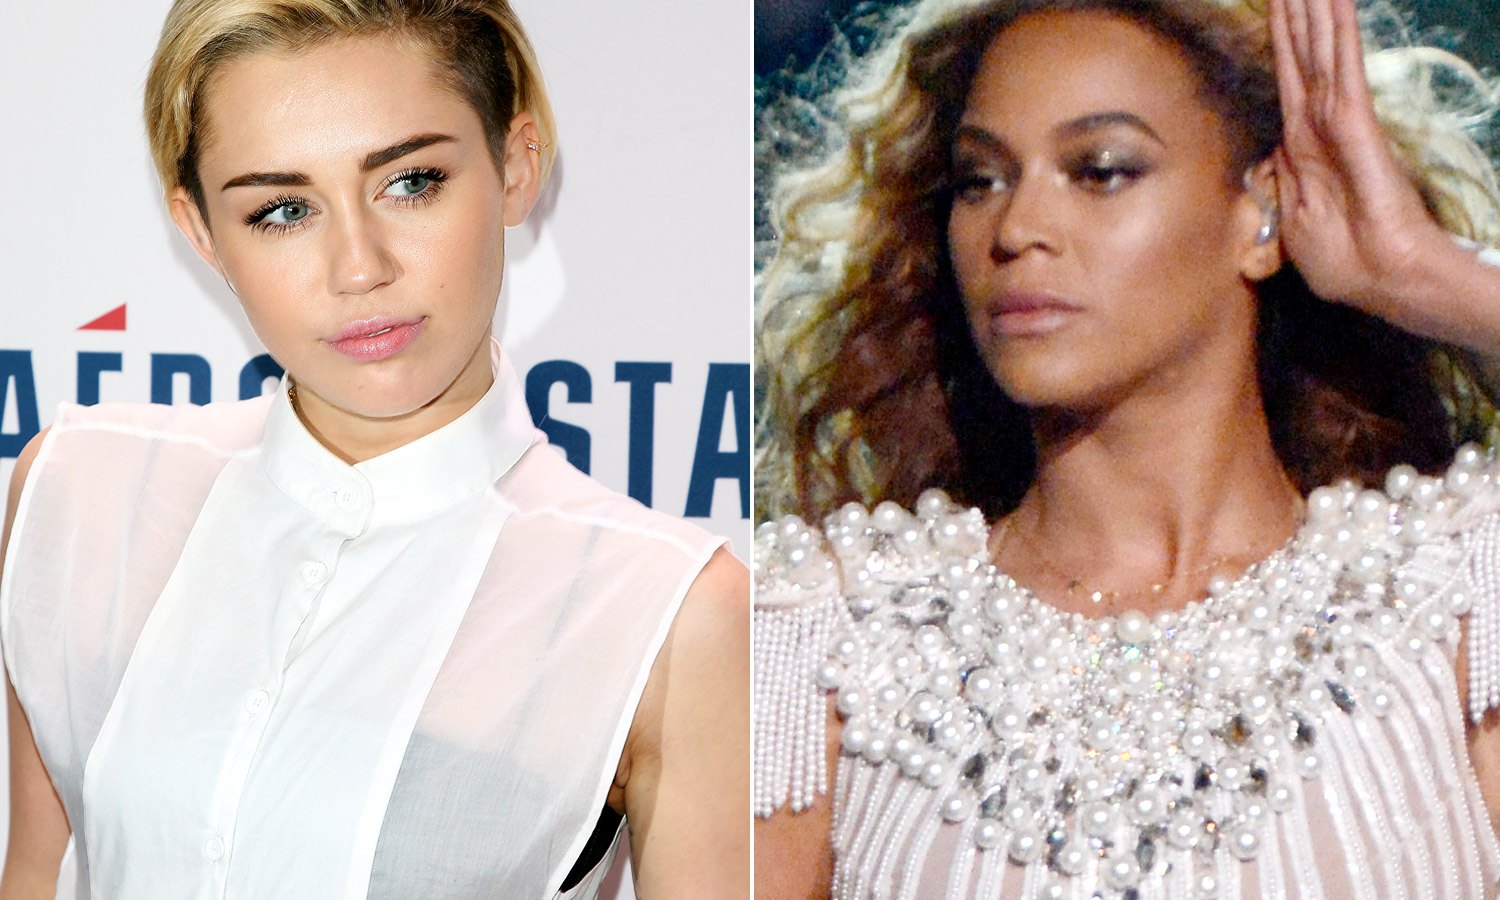 Miley Cyrus and Beyonce Knowles